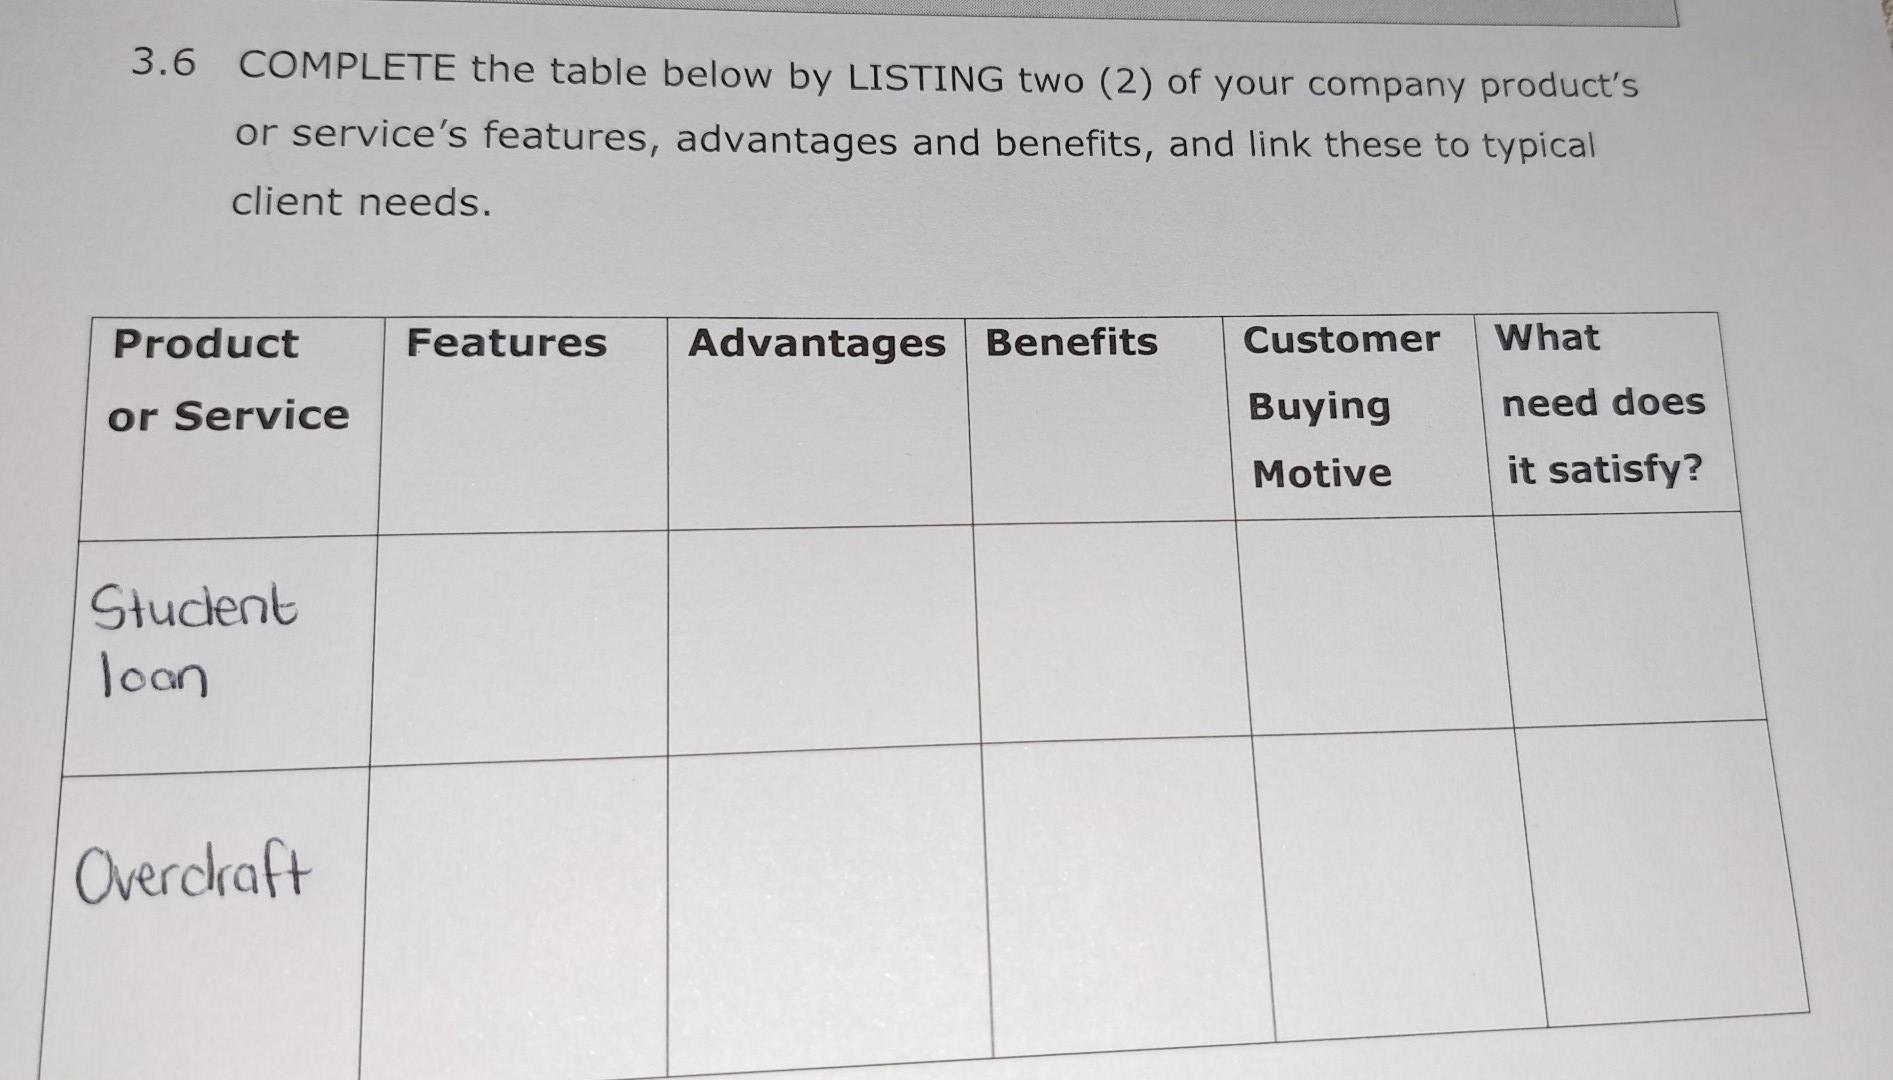 3.6 COMPLETE the table below by LISTING two (2) of your company product's or service's features, advantages